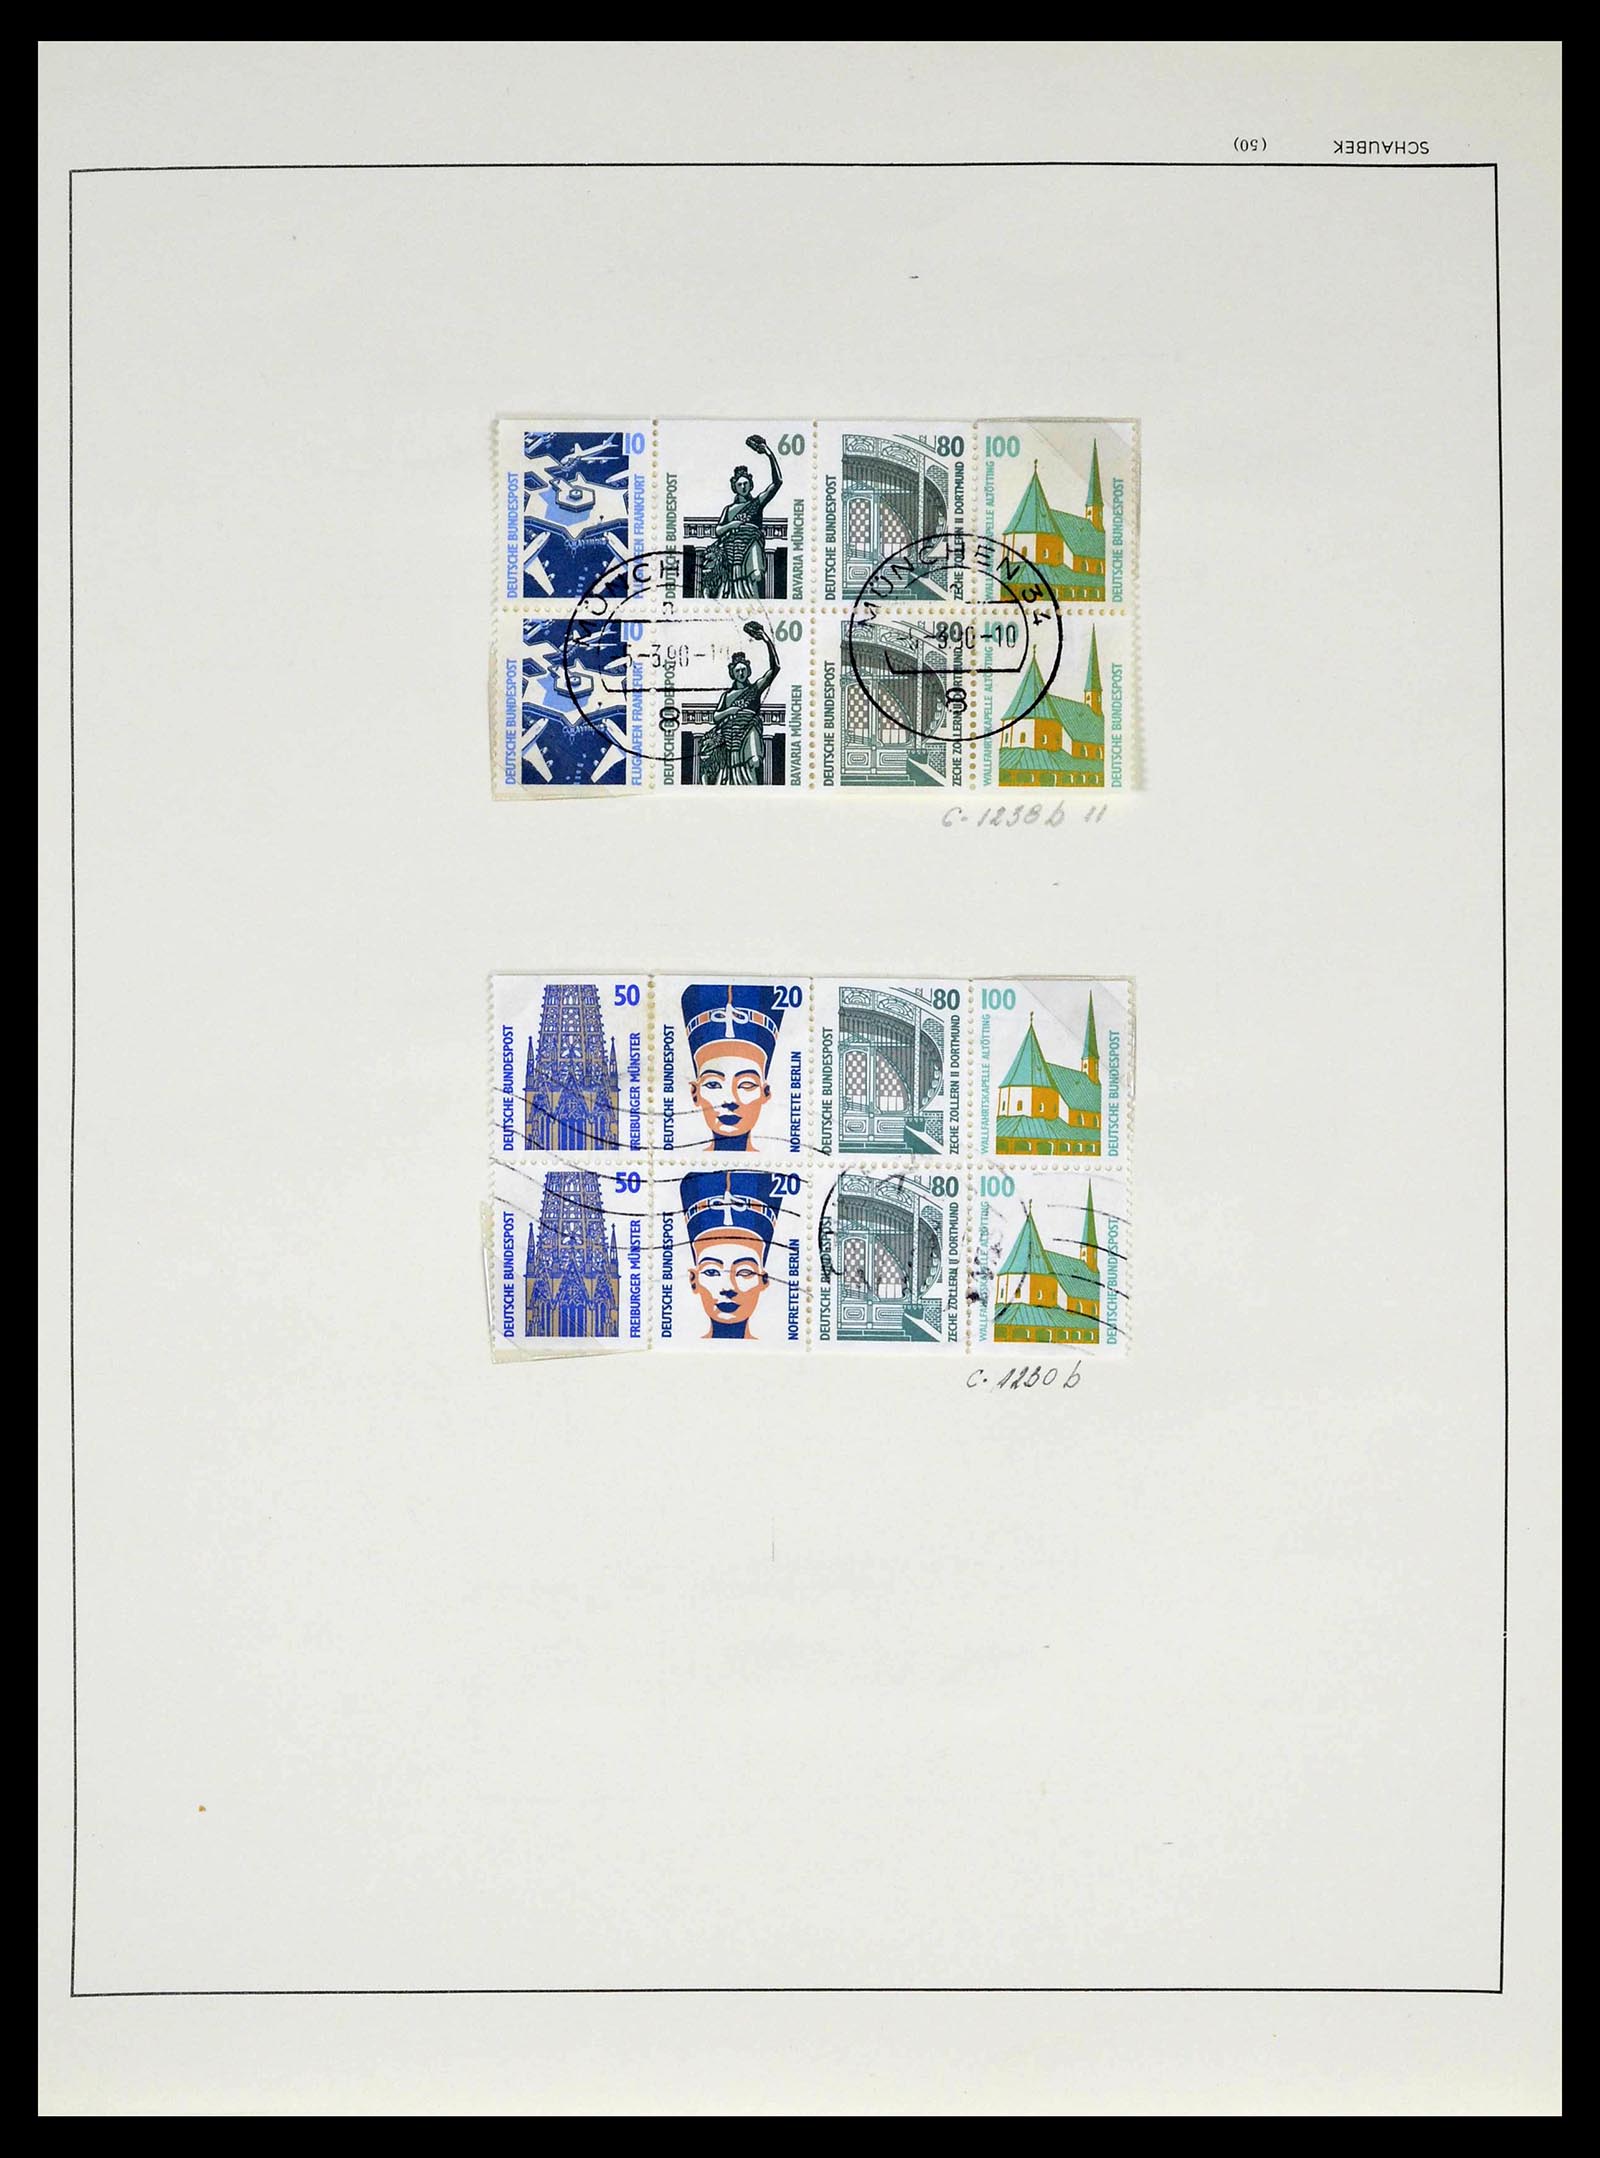 39324 0019 - Stamp collection 39324 Bundespost 1986-2012.